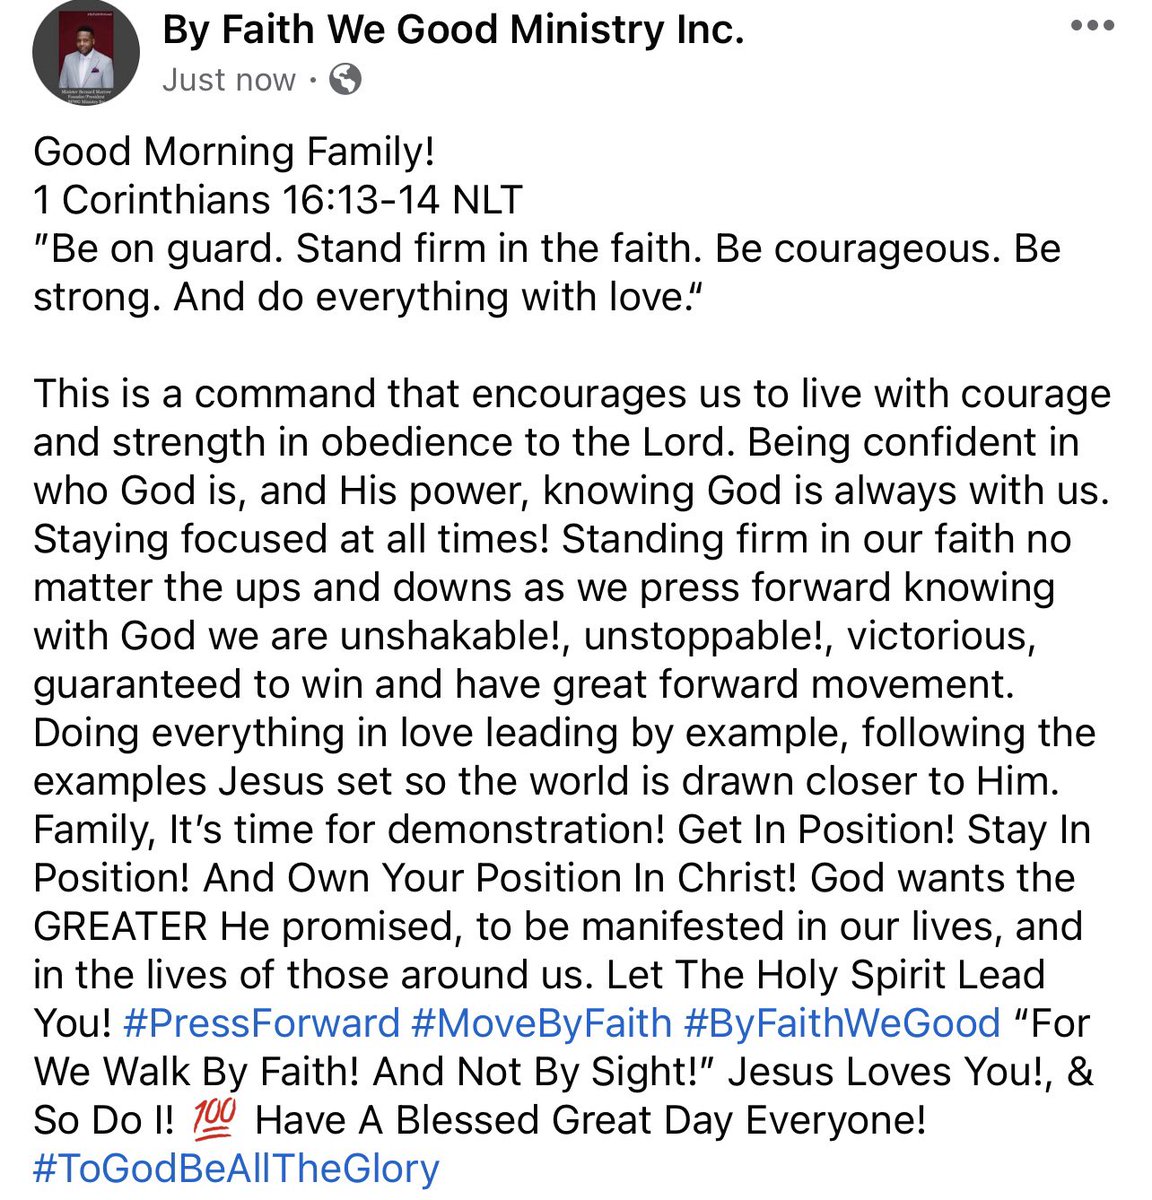 Good Morning Family! 
Get In Position! Stay In Position! And Own Your Position In Christ! Stay Focused! Let The Holy Spirit Lead You!

#ByFaithWeGood #InspirationalPost #MorningEncouragement #StayFocused